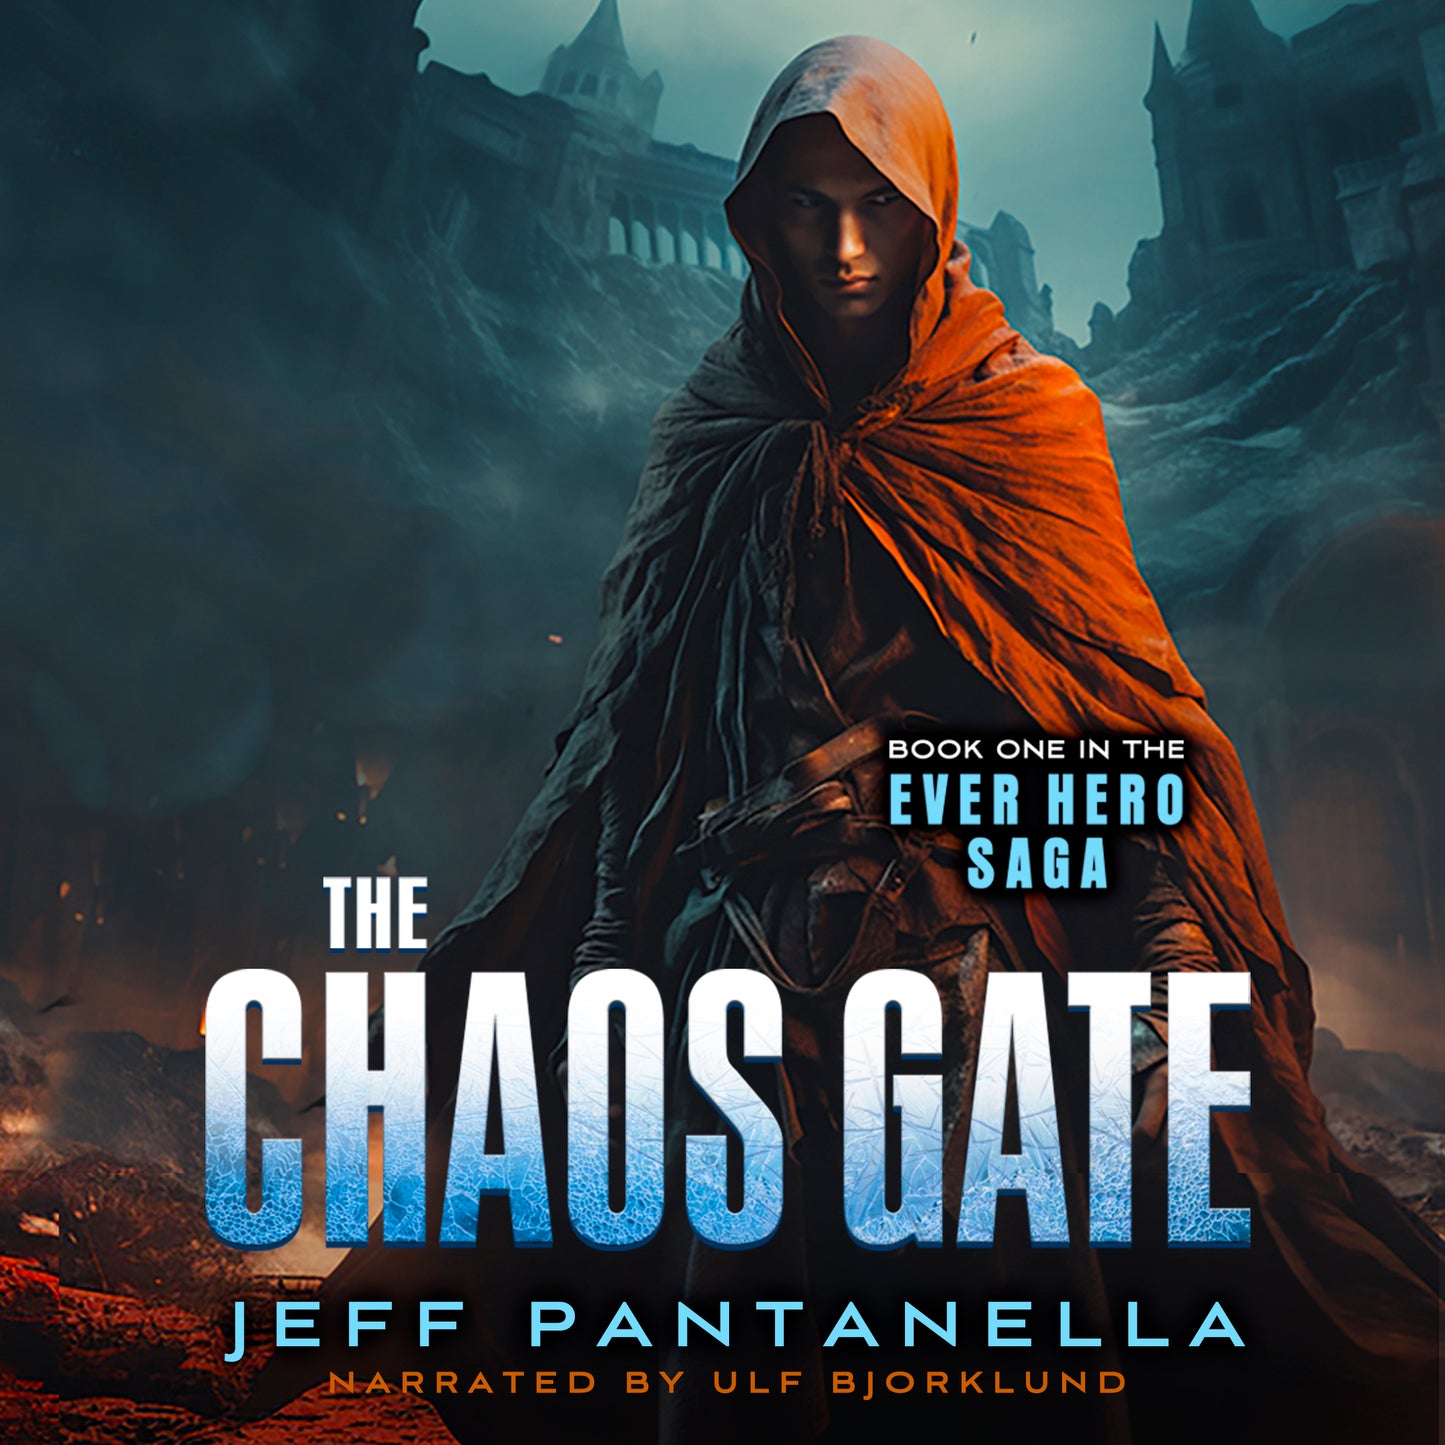 BOOK 1: THE CHAOS GATE (AUDIOBOOK)